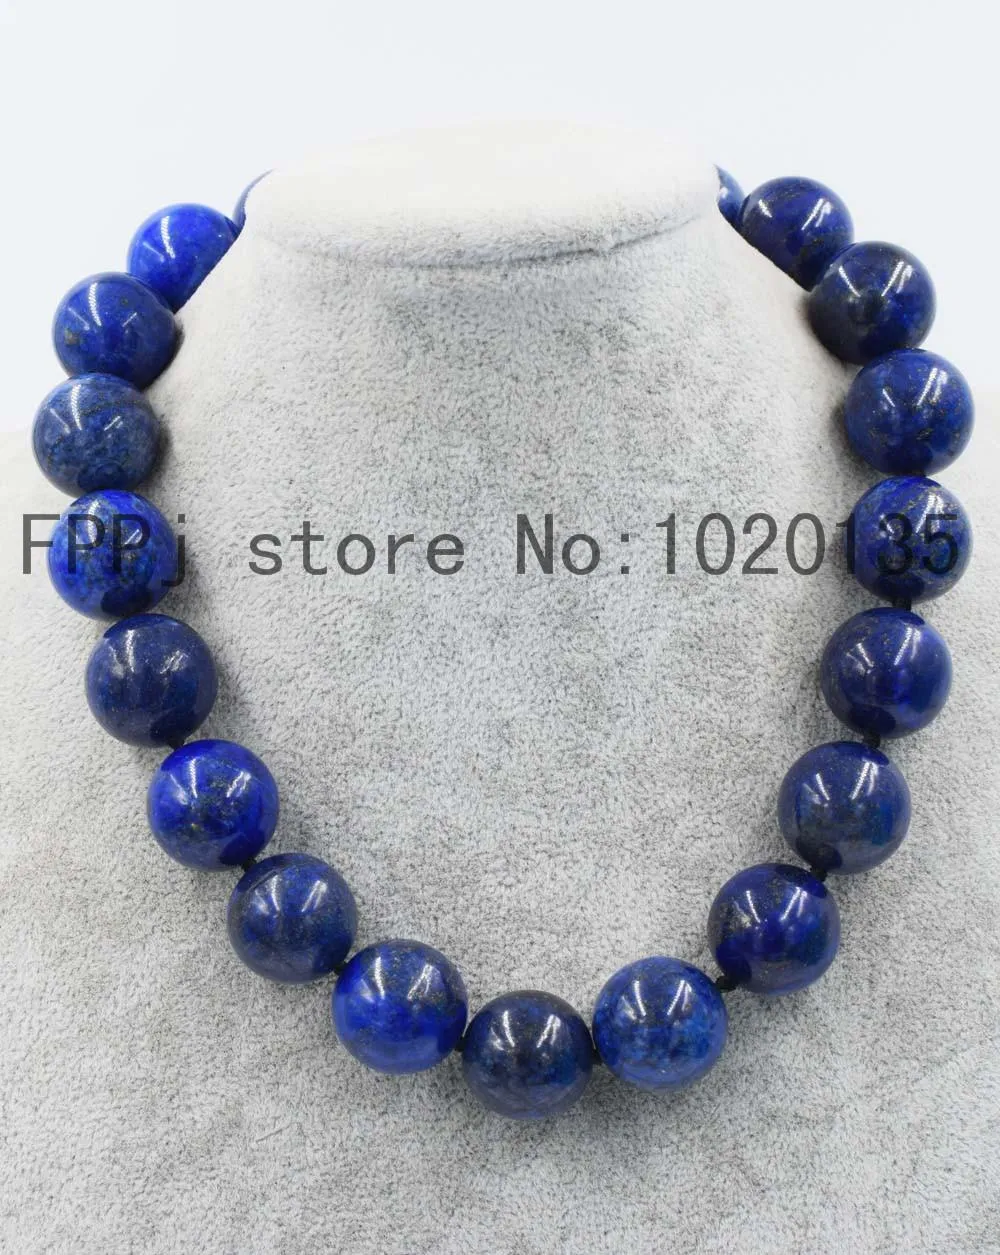 Necklaces wow! lapis lazuli round blue 10 20mm necklace 18inch wholesale beads FPPJ nature